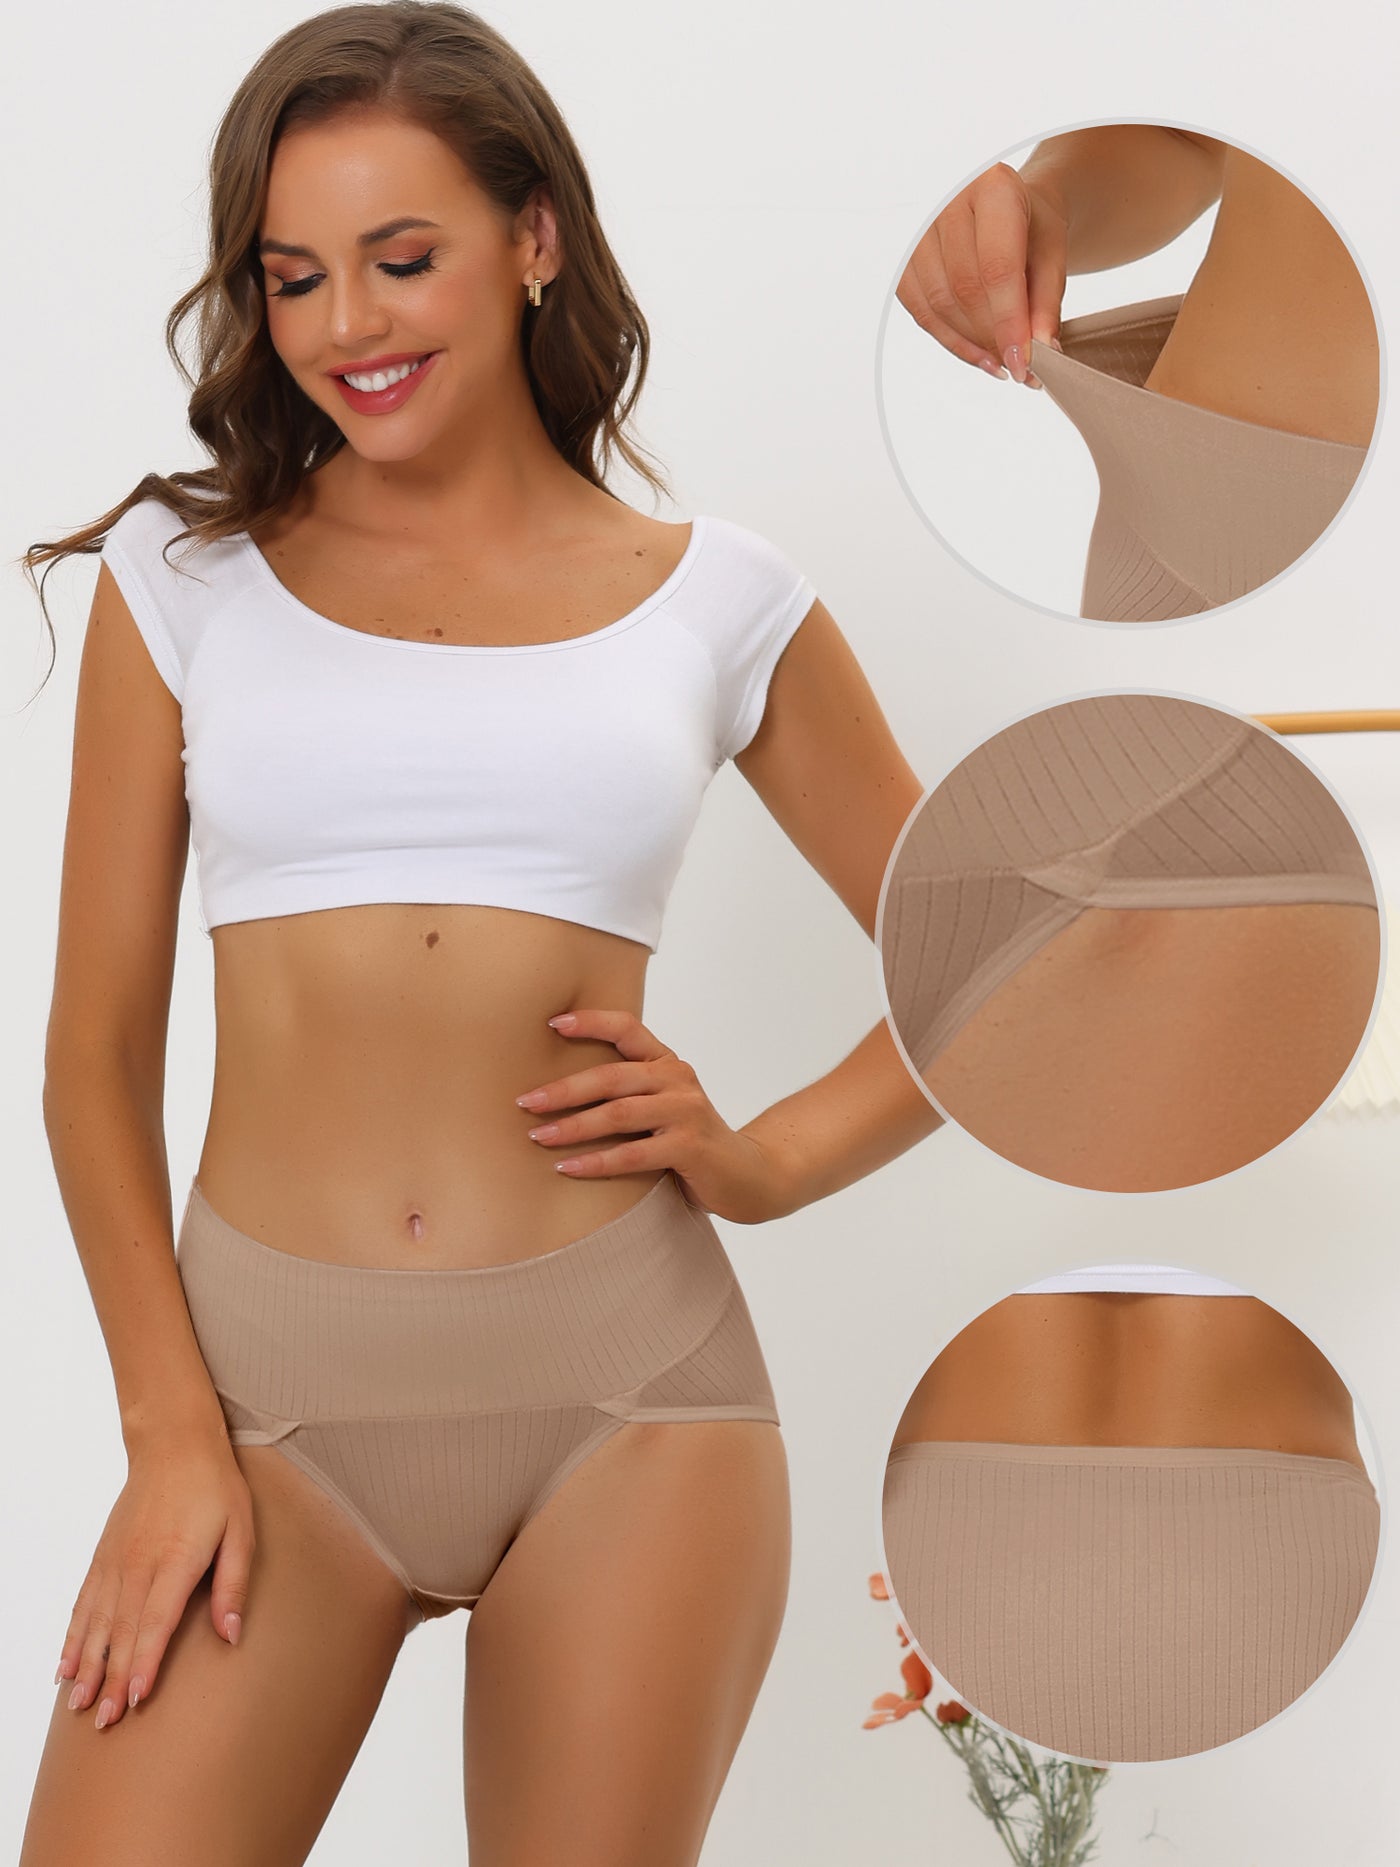 SILKY SPANDEX & LACE CONTOURED 19- 22 PANTY GIRDLE SHAPER LONG LEG S-5XL  - Simpson Advanced Chiropractic & Medical Center